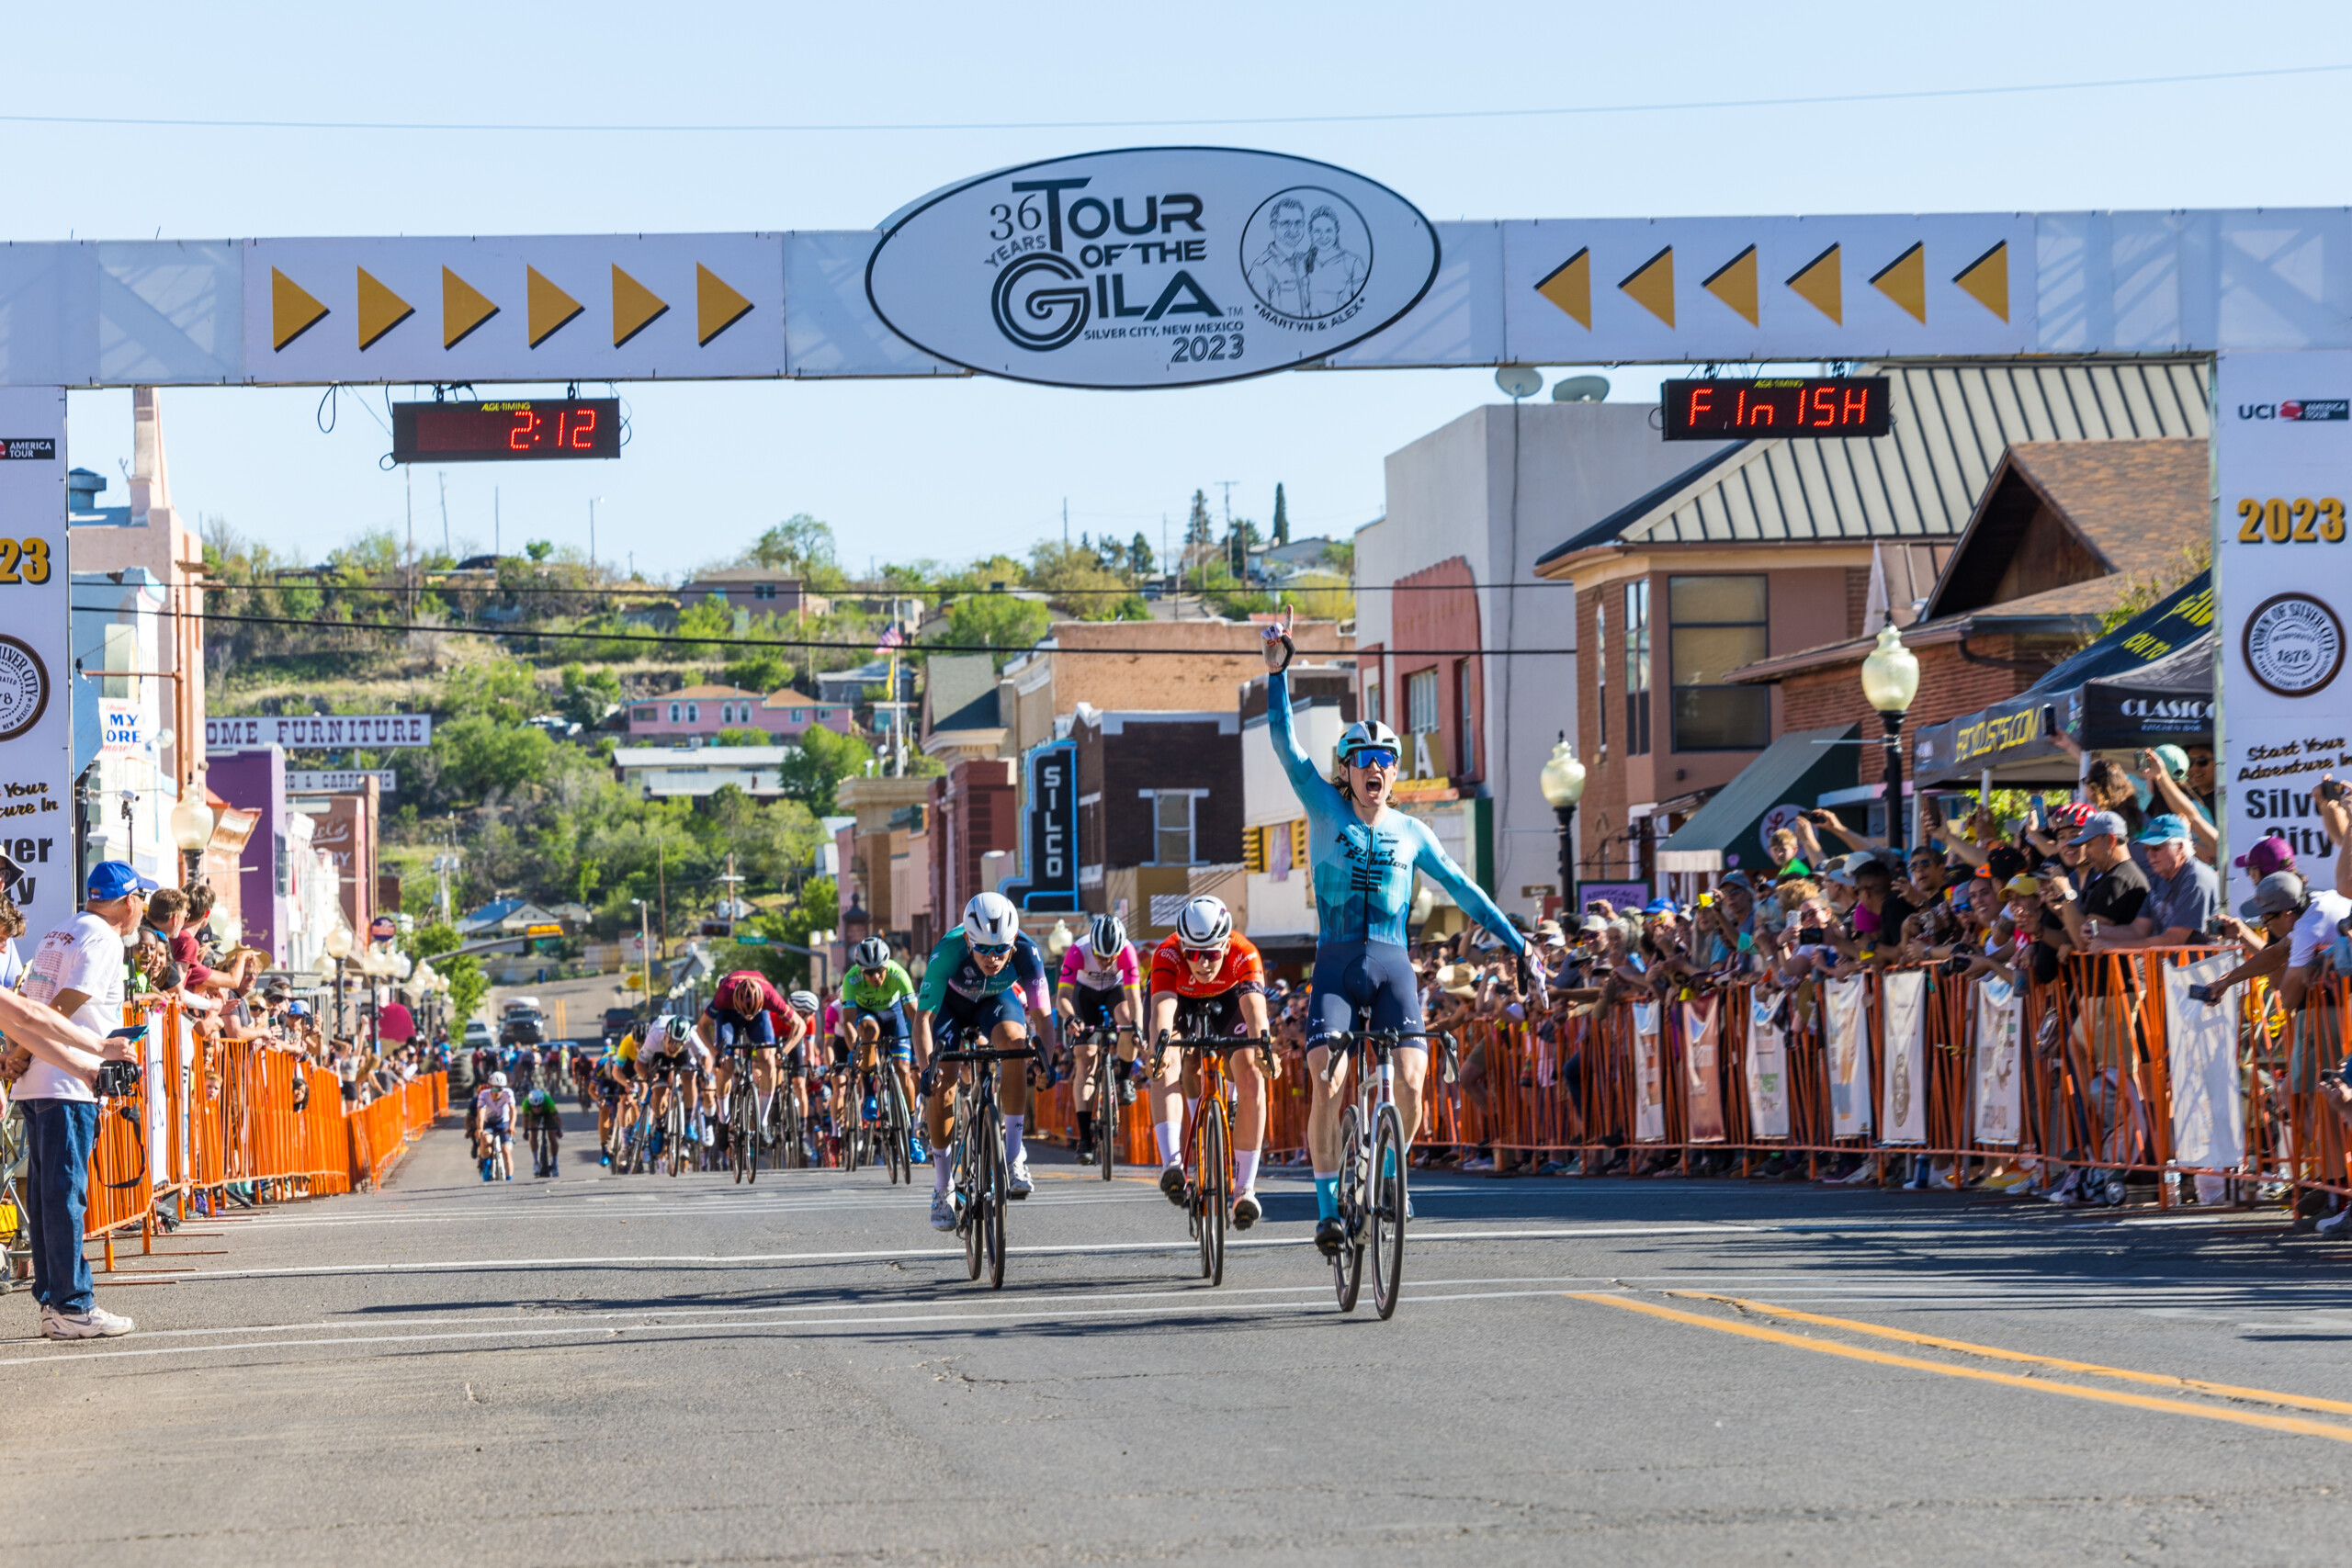 Bickmore, Project Echelon Repeat at Stage 4 Crit, Røed Keeps Lead Headed into Final Day at Tour of the Gila